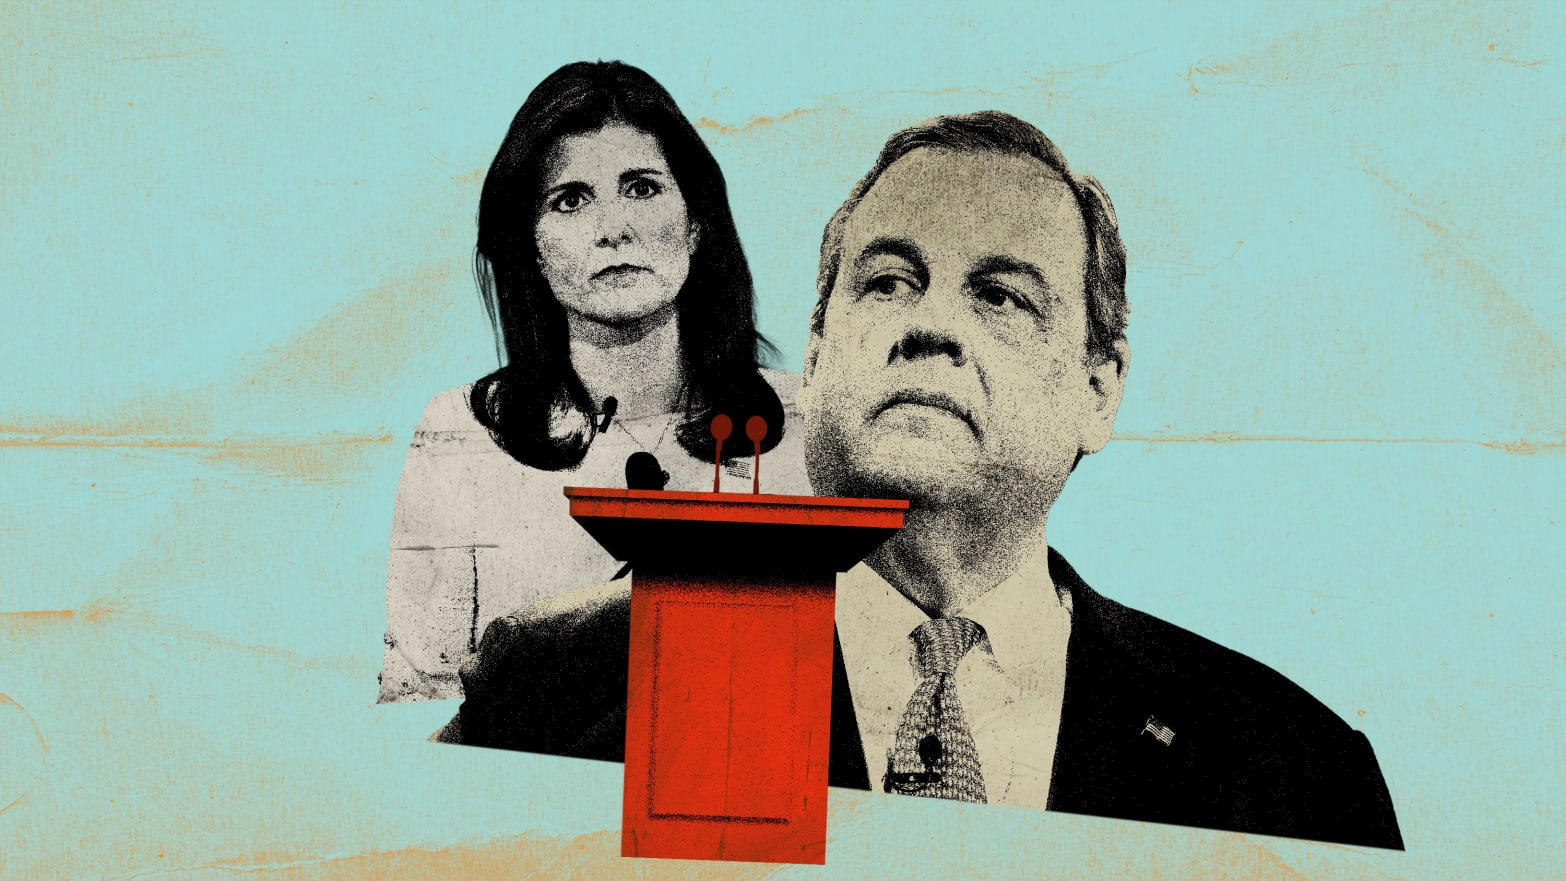 Photo illustration of Chris Christie, Nikki Haley, and a podium on a blue distressed background.